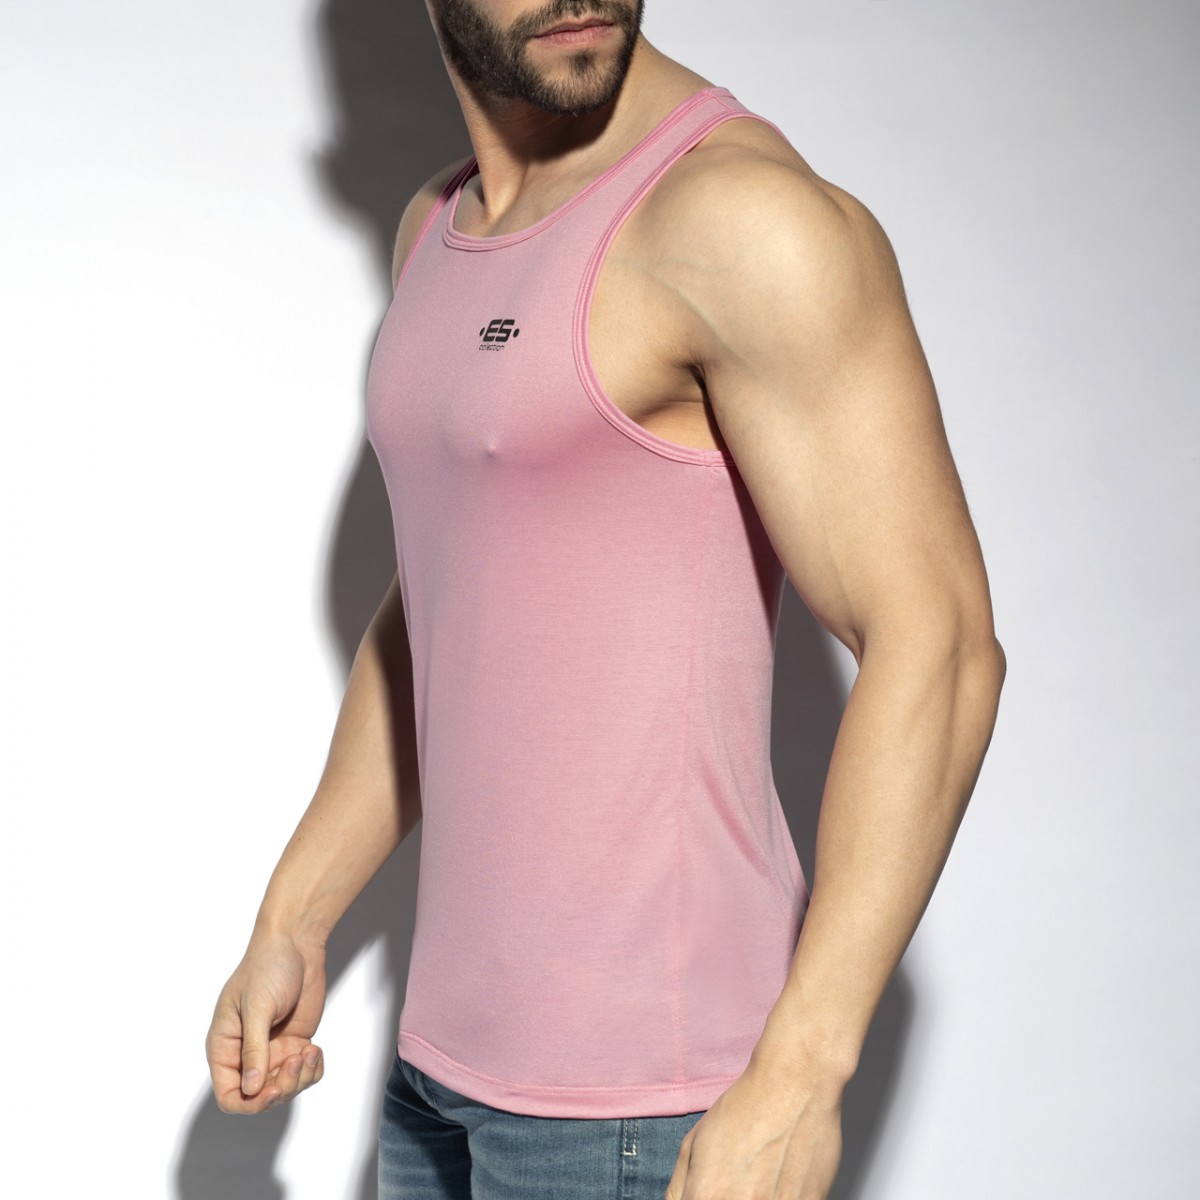 ES Collection Tank Top pink